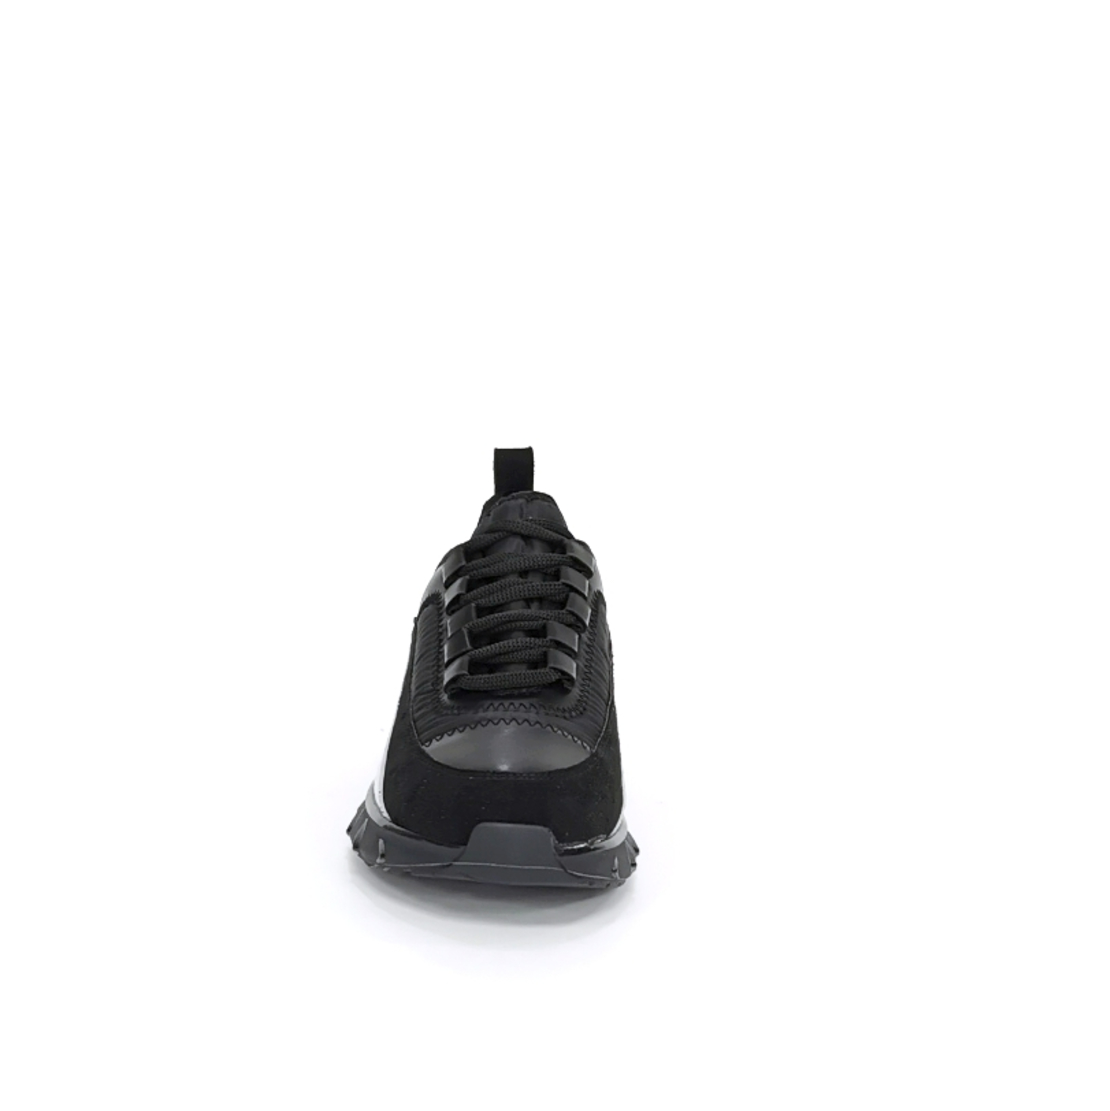 Women's sneakers made of eco leather + textile with anatomical insole in black 7282